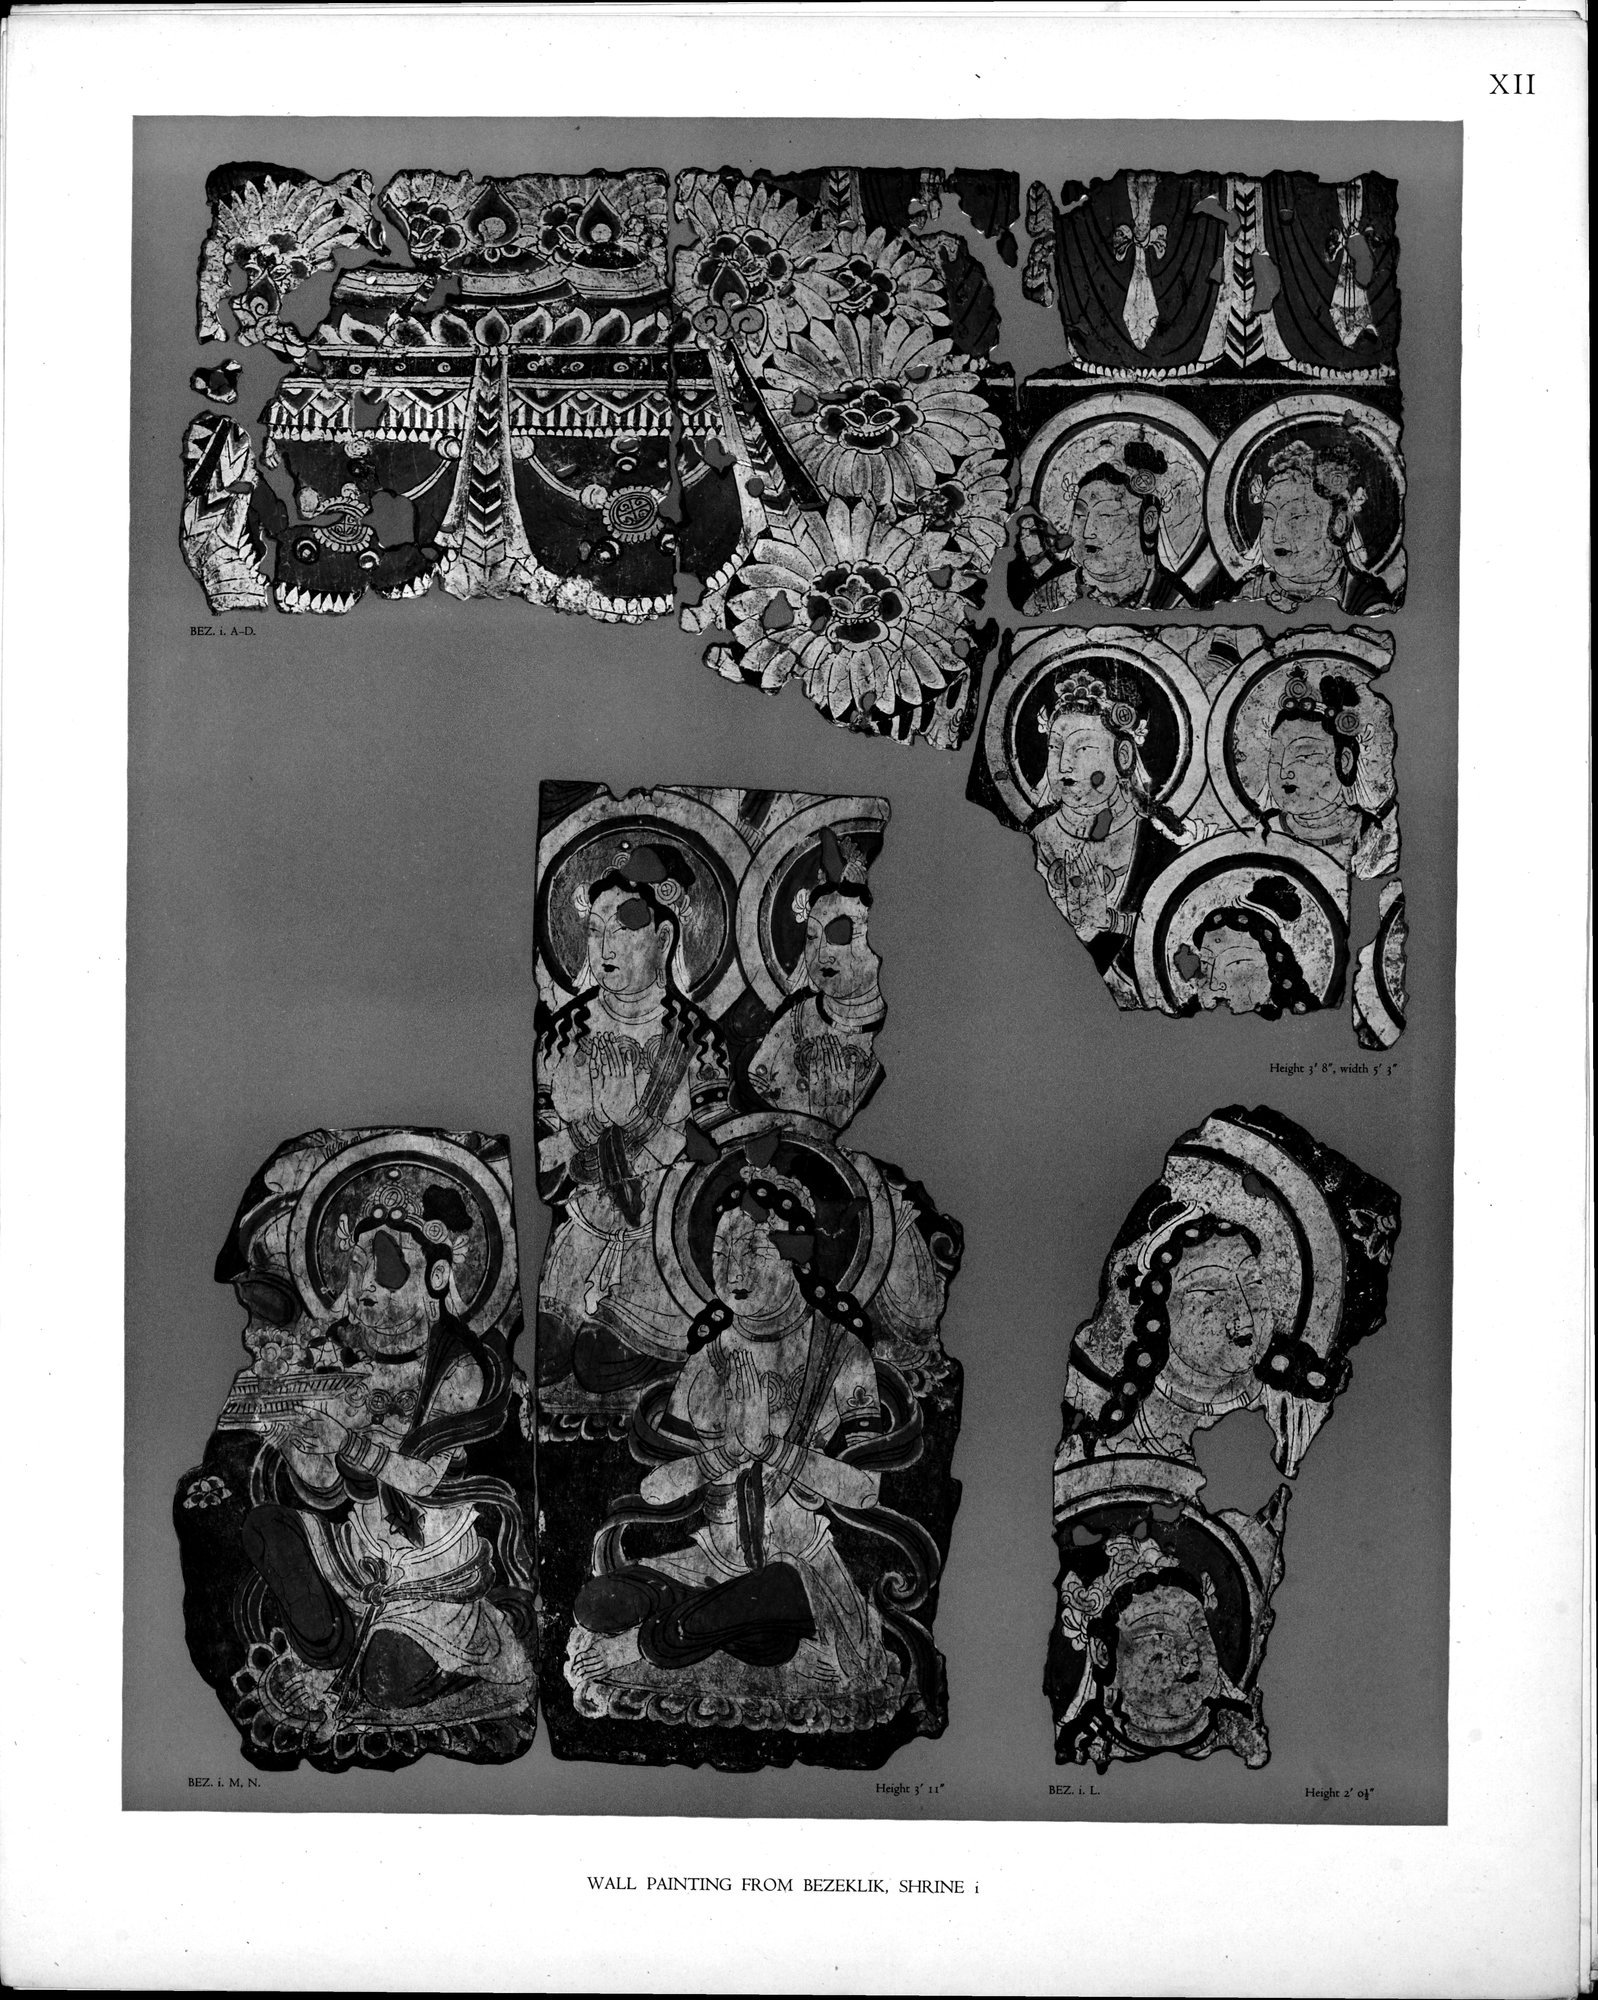 Wall Paintings from Ancient Shrines in Central Asia : vol.2 / Page 15 (Grayscale High Resolution Image)